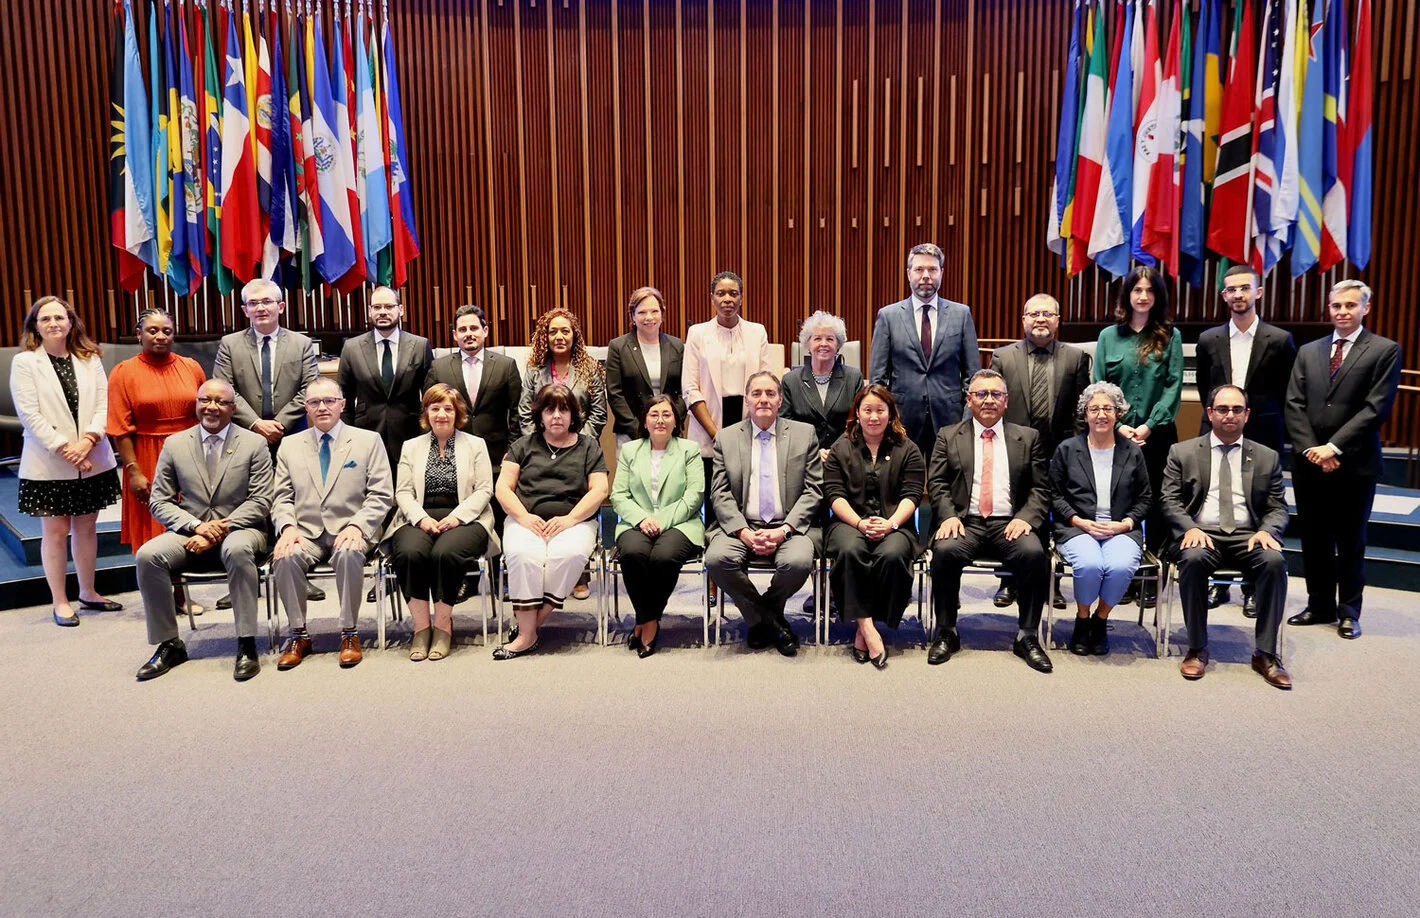 PAHO Executive Committee opens to discuss priority issues, including epidemic intelligence and health sector action on climate change